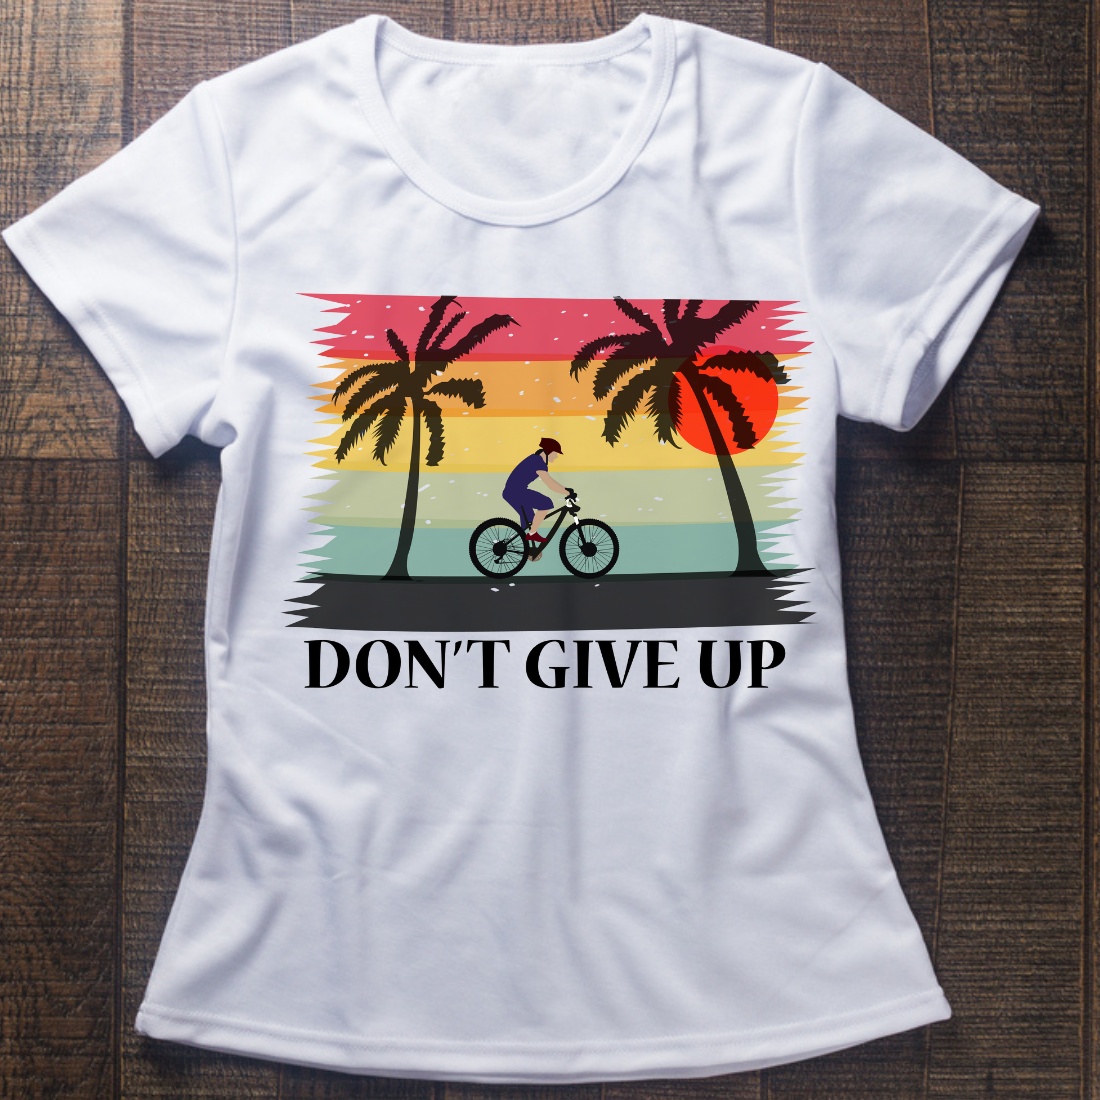 Women's t - shirt that says don't give up with a.